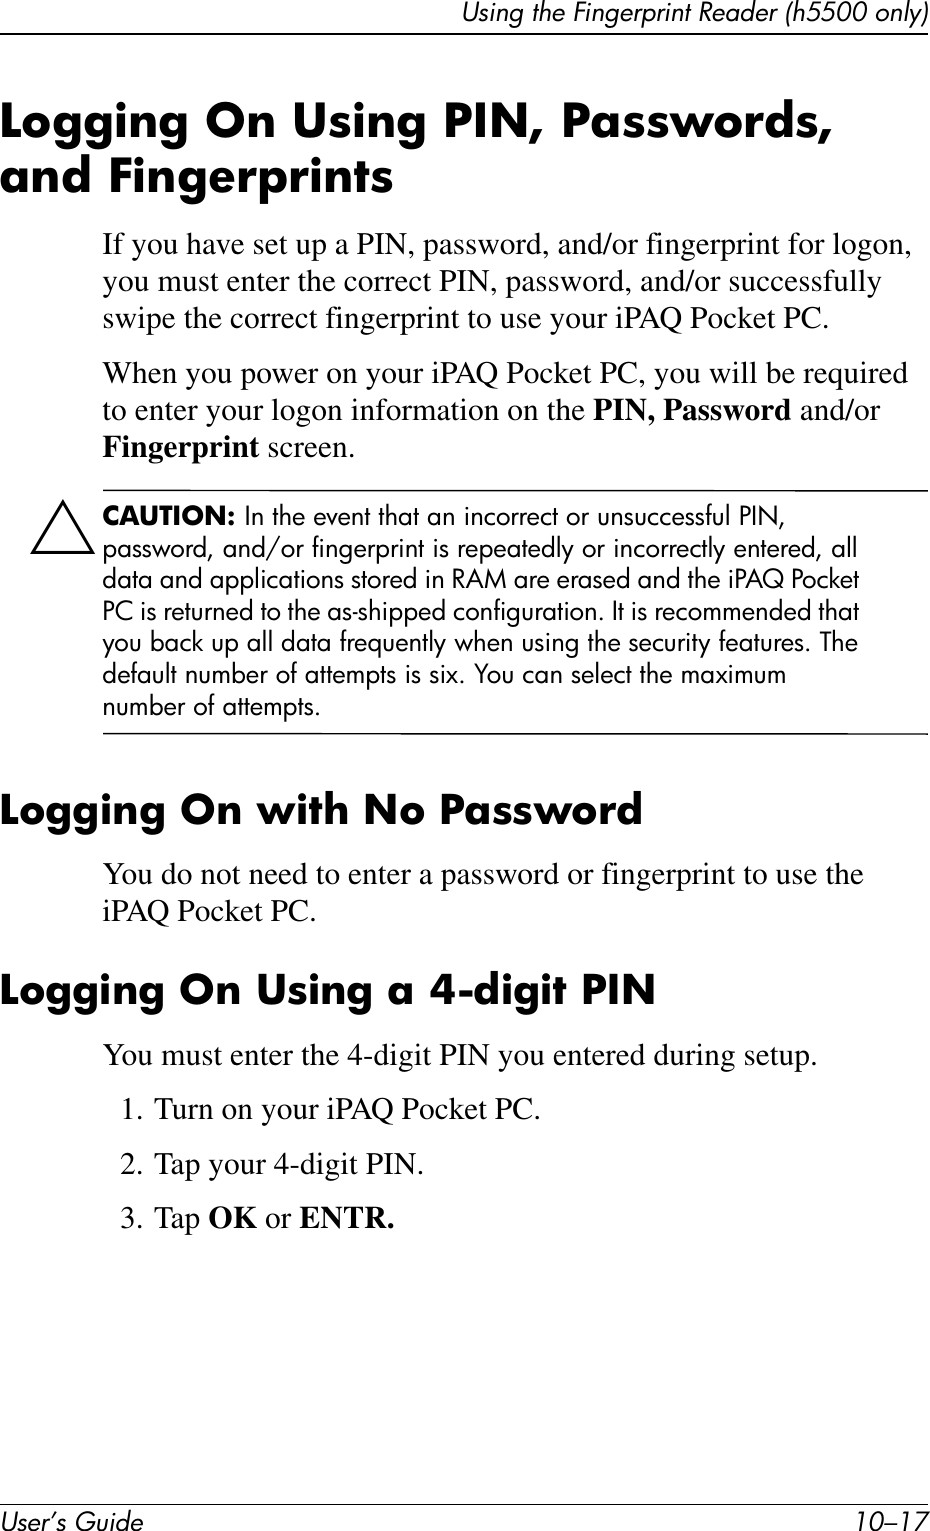 Using the Fingerprint Reader (h5500 only)User’s Guide 10–17Logging On Using PIN, Passwords, and FingerprintsIf you have set up a PIN, password, and/or fingerprint for logon, you must enter the correct PIN, password, and/or successfully swipe the correct fingerprint to use your iPAQ Pocket PC. When you power on your iPAQ Pocket PC, you will be required to enter your logon information on the PIN, Password and/or Fingerprint screen.ÄCAUTION: In the event that an incorrect or unsuccessful PIN, password, and/or fingerprint is repeatedly or incorrectly entered, all data and applications stored in RAM are erased and the iPAQ Pocket PC is returned to the as-shipped configuration. It is recommended that you back up all data frequently when using the security features. The default number of attempts is six. You can select the maximum number of attempts.Logging On with No PasswordYou do not need to enter a password or fingerprint to use the iPAQ Pocket PC.Logging On Using a 4-digit PINYou must enter the 4-digit PIN you entered during setup.1. Turn on your iPAQ Pocket PC.2. Tap your 4-digit PIN.3. Tap OK or ENTR.